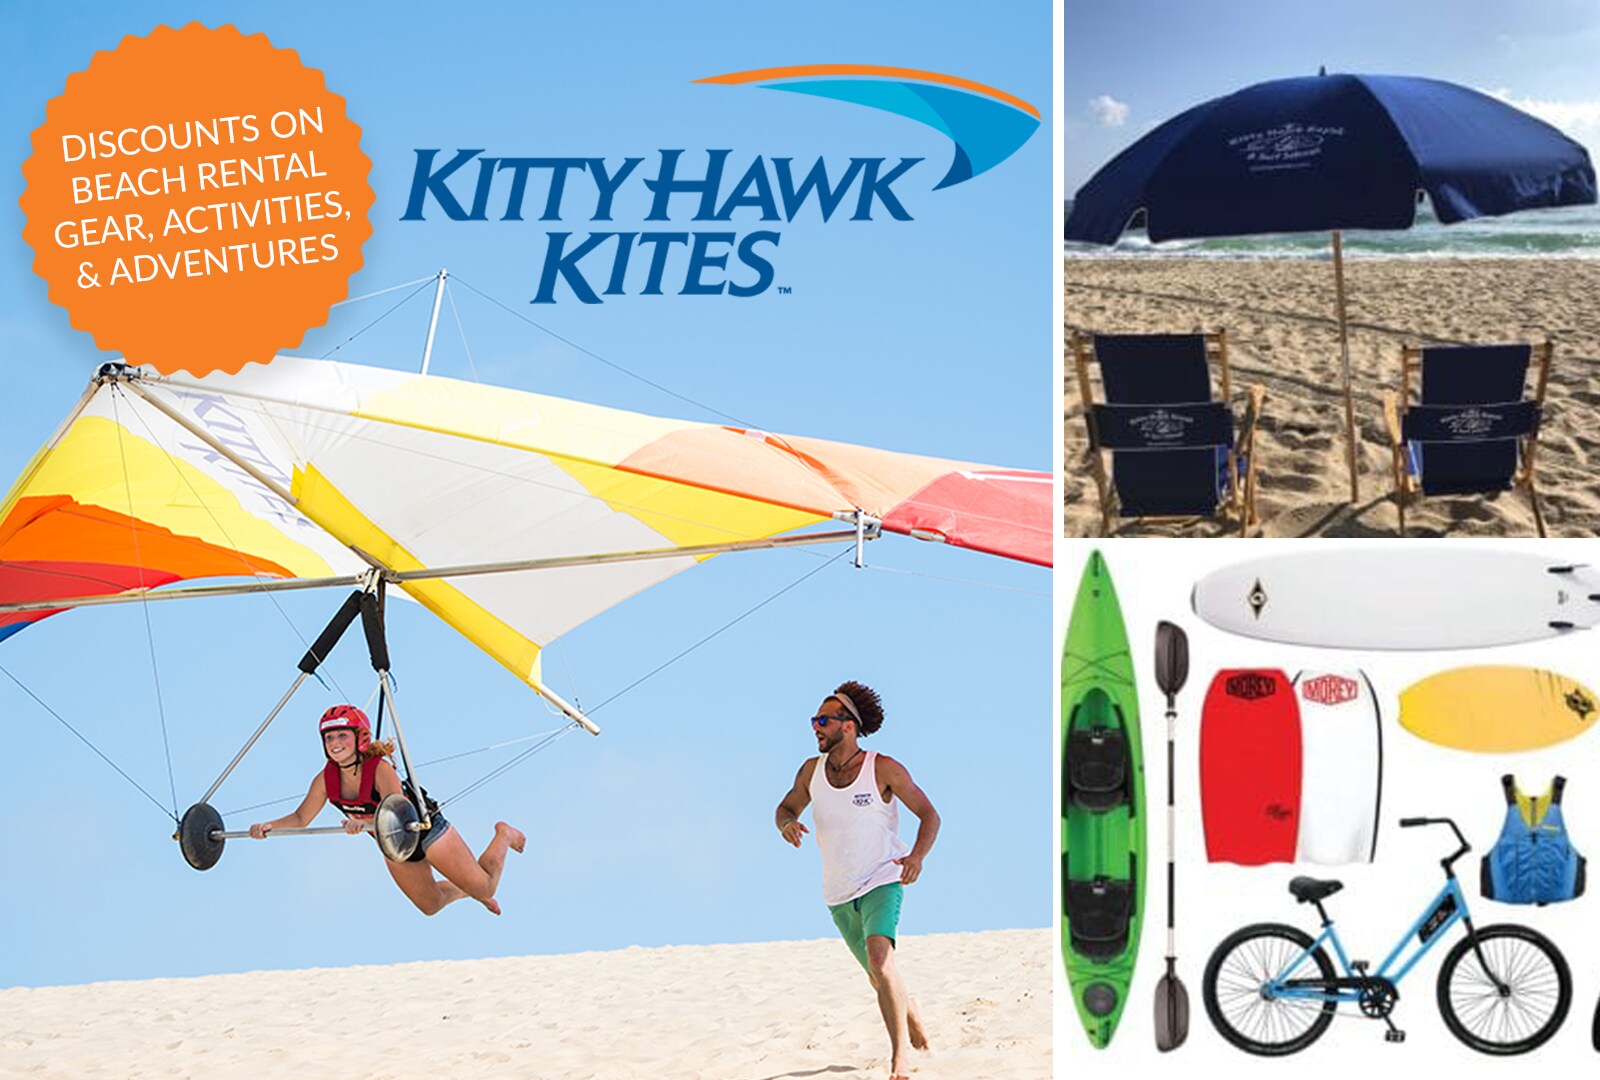 Exclusive Kitty Hawk Kites discounts for Seaside Vacations guests.